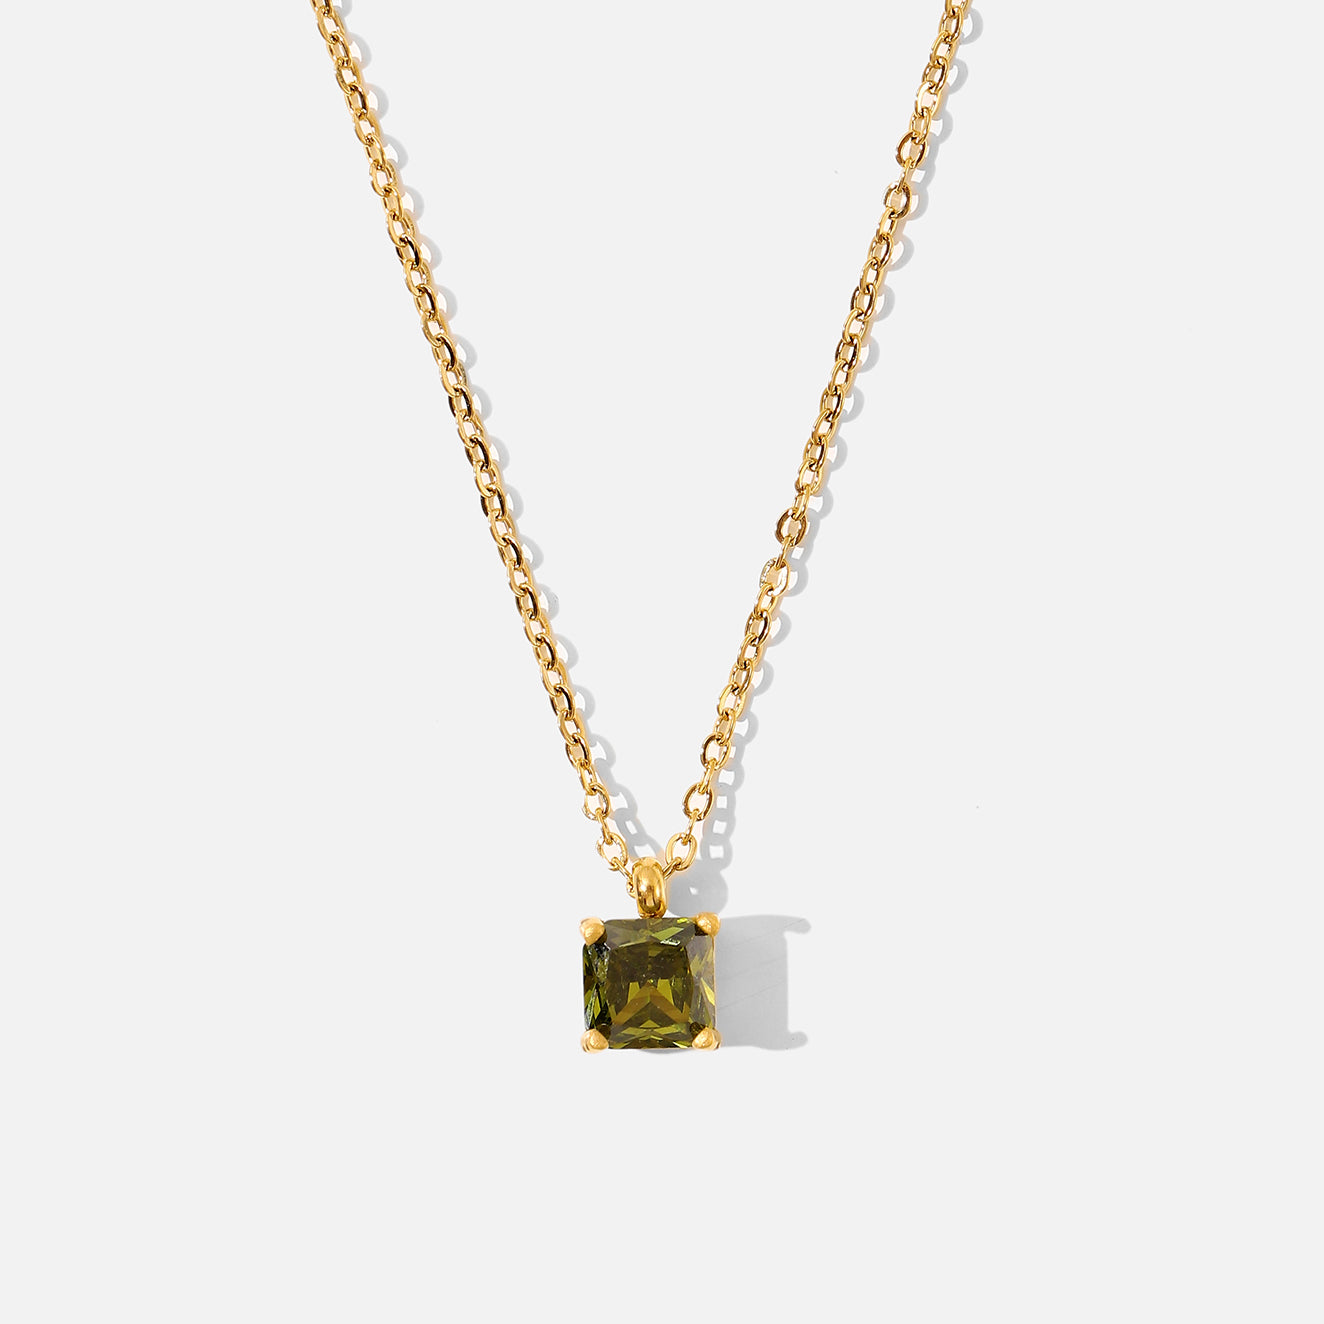 Gold Necklace with a Square Green Cubic Zirconia